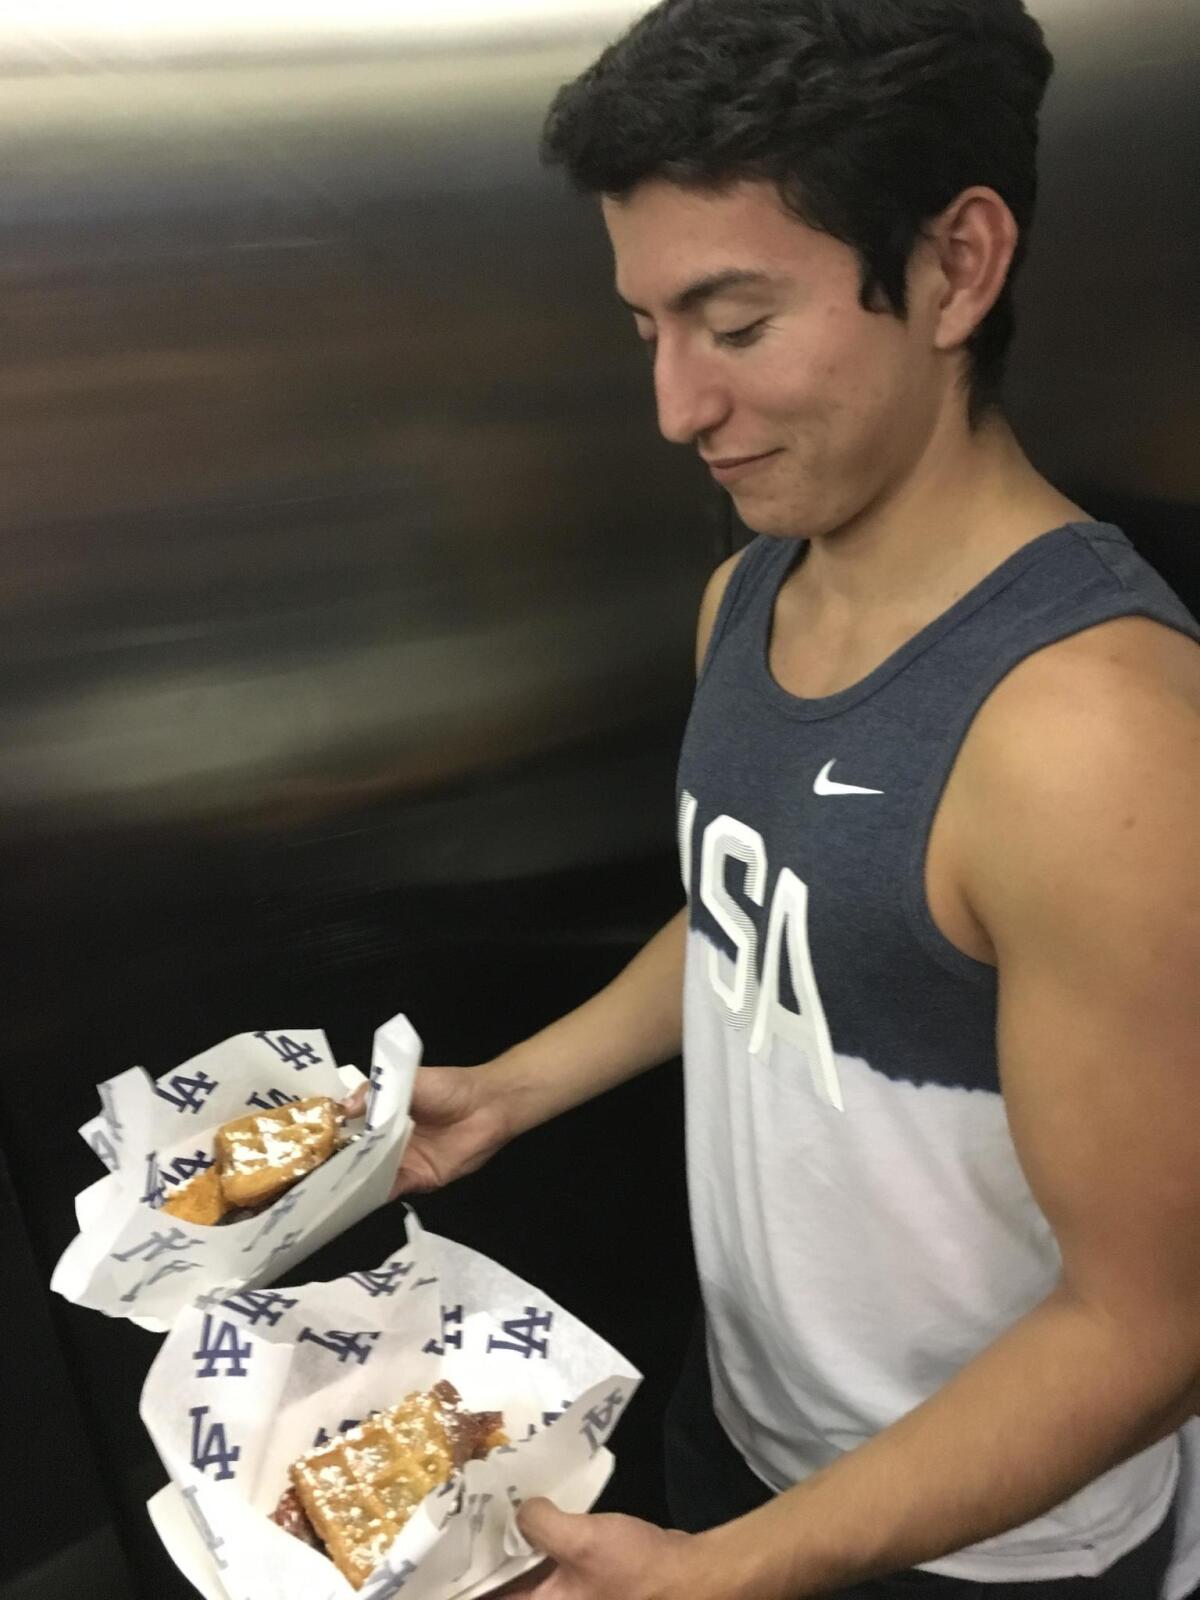 Cameron Romo carries two chicken waffle sandwiches.